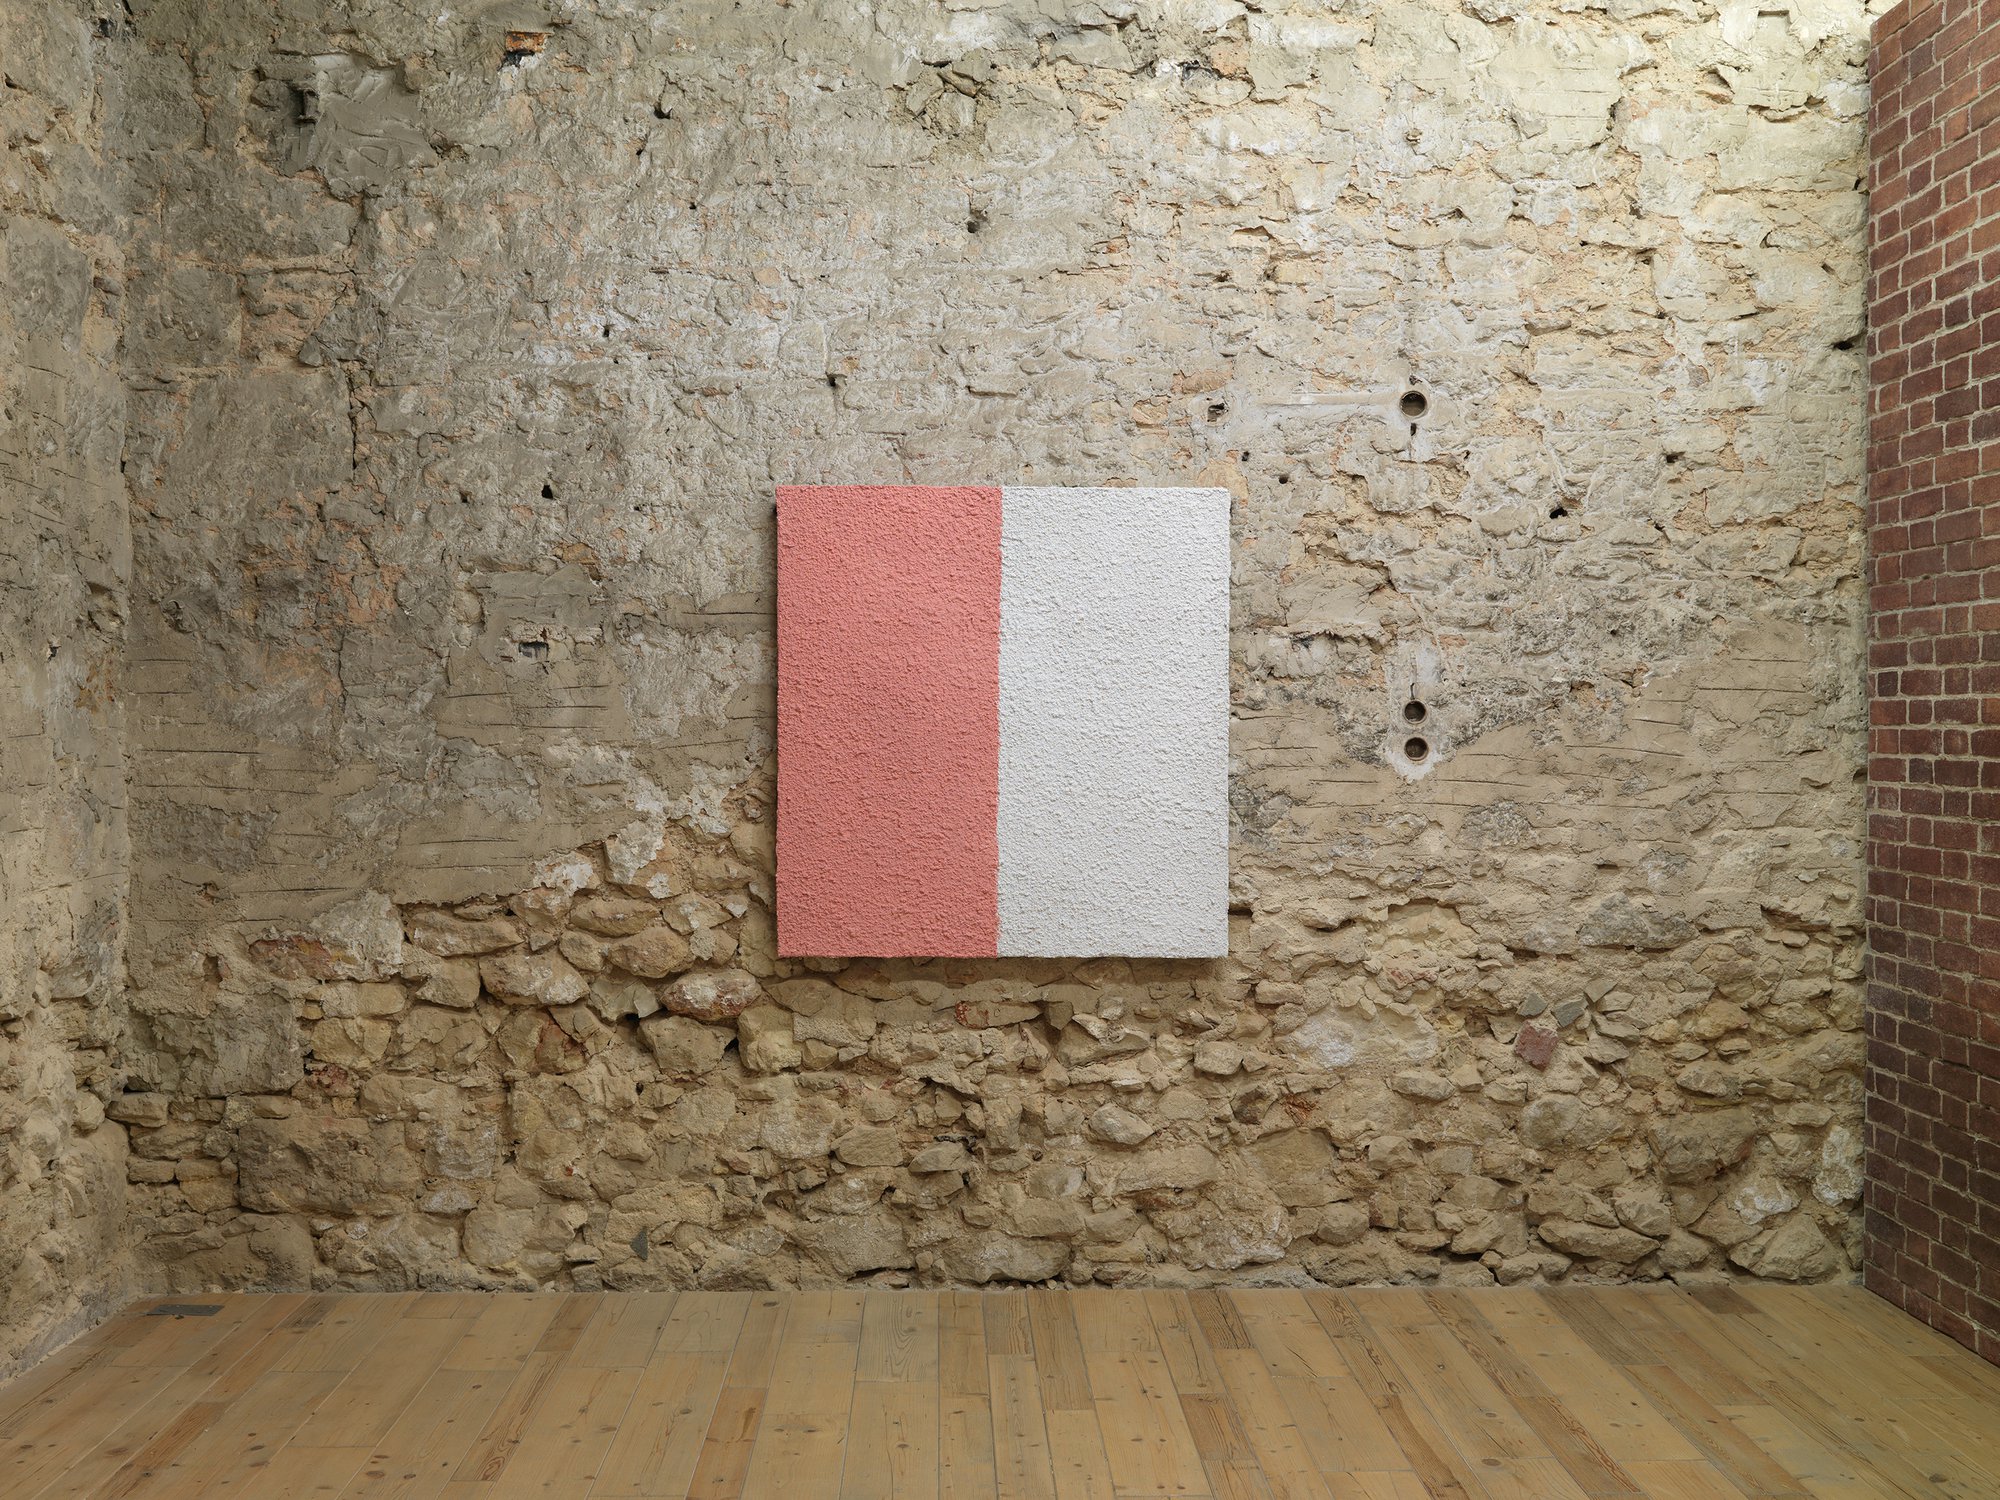 Christodoulos Panayiotou, Untitled (Spritz), stucco plaster finish, wall paint, foam board, mortar, wooden frame, 127.5 x 121 x 6 cm (50 1/4 x 47 5/8 x 2 3/8 in), 2021